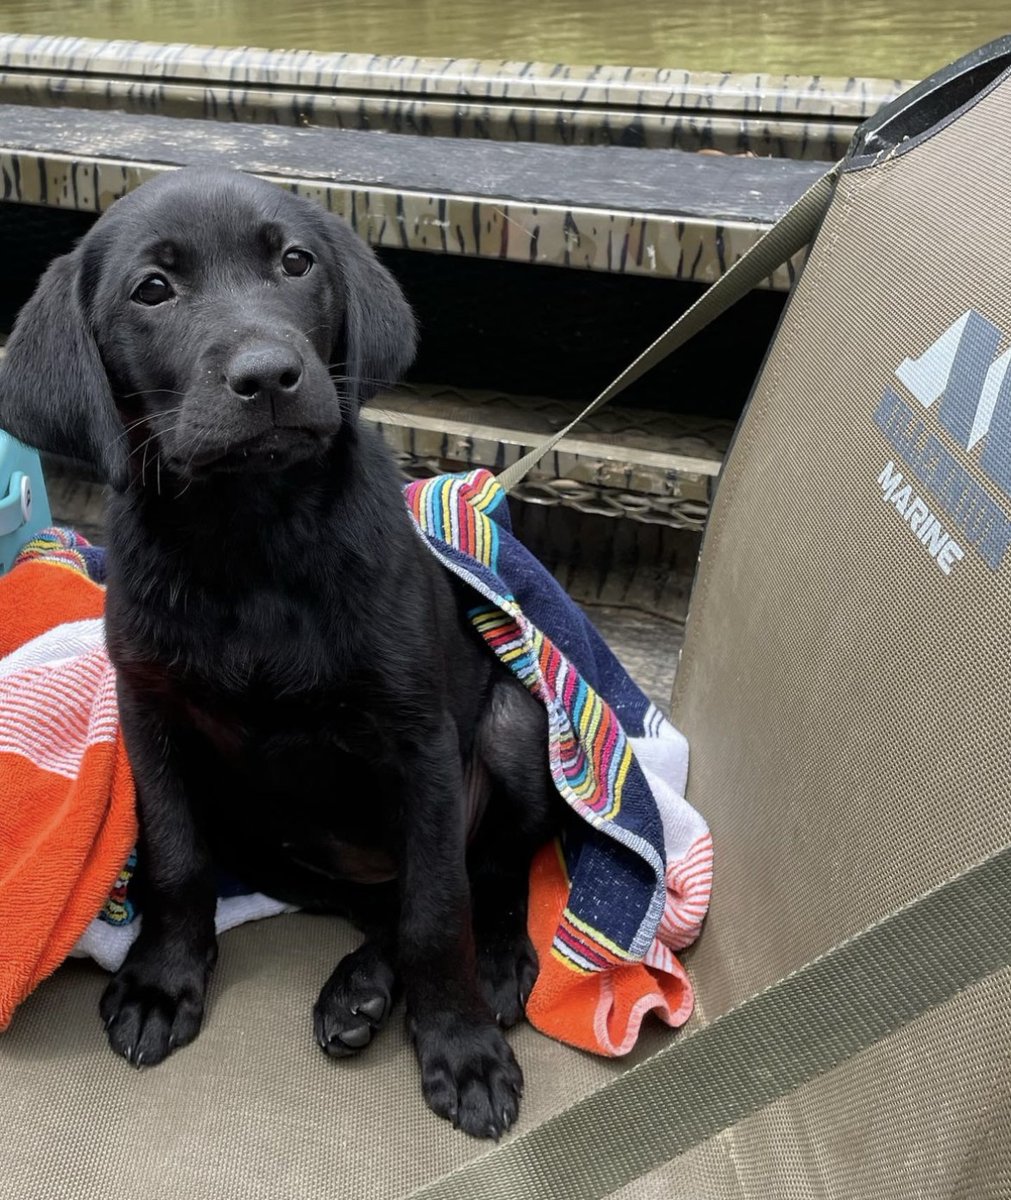 You just can’t beat a boat ride with your furry Co-Captain. 📸@huxleybelle_ #MillenniumMarine #FishMillennium #boatseats #anglerapproved #catchoftheday #Mansbestfriend